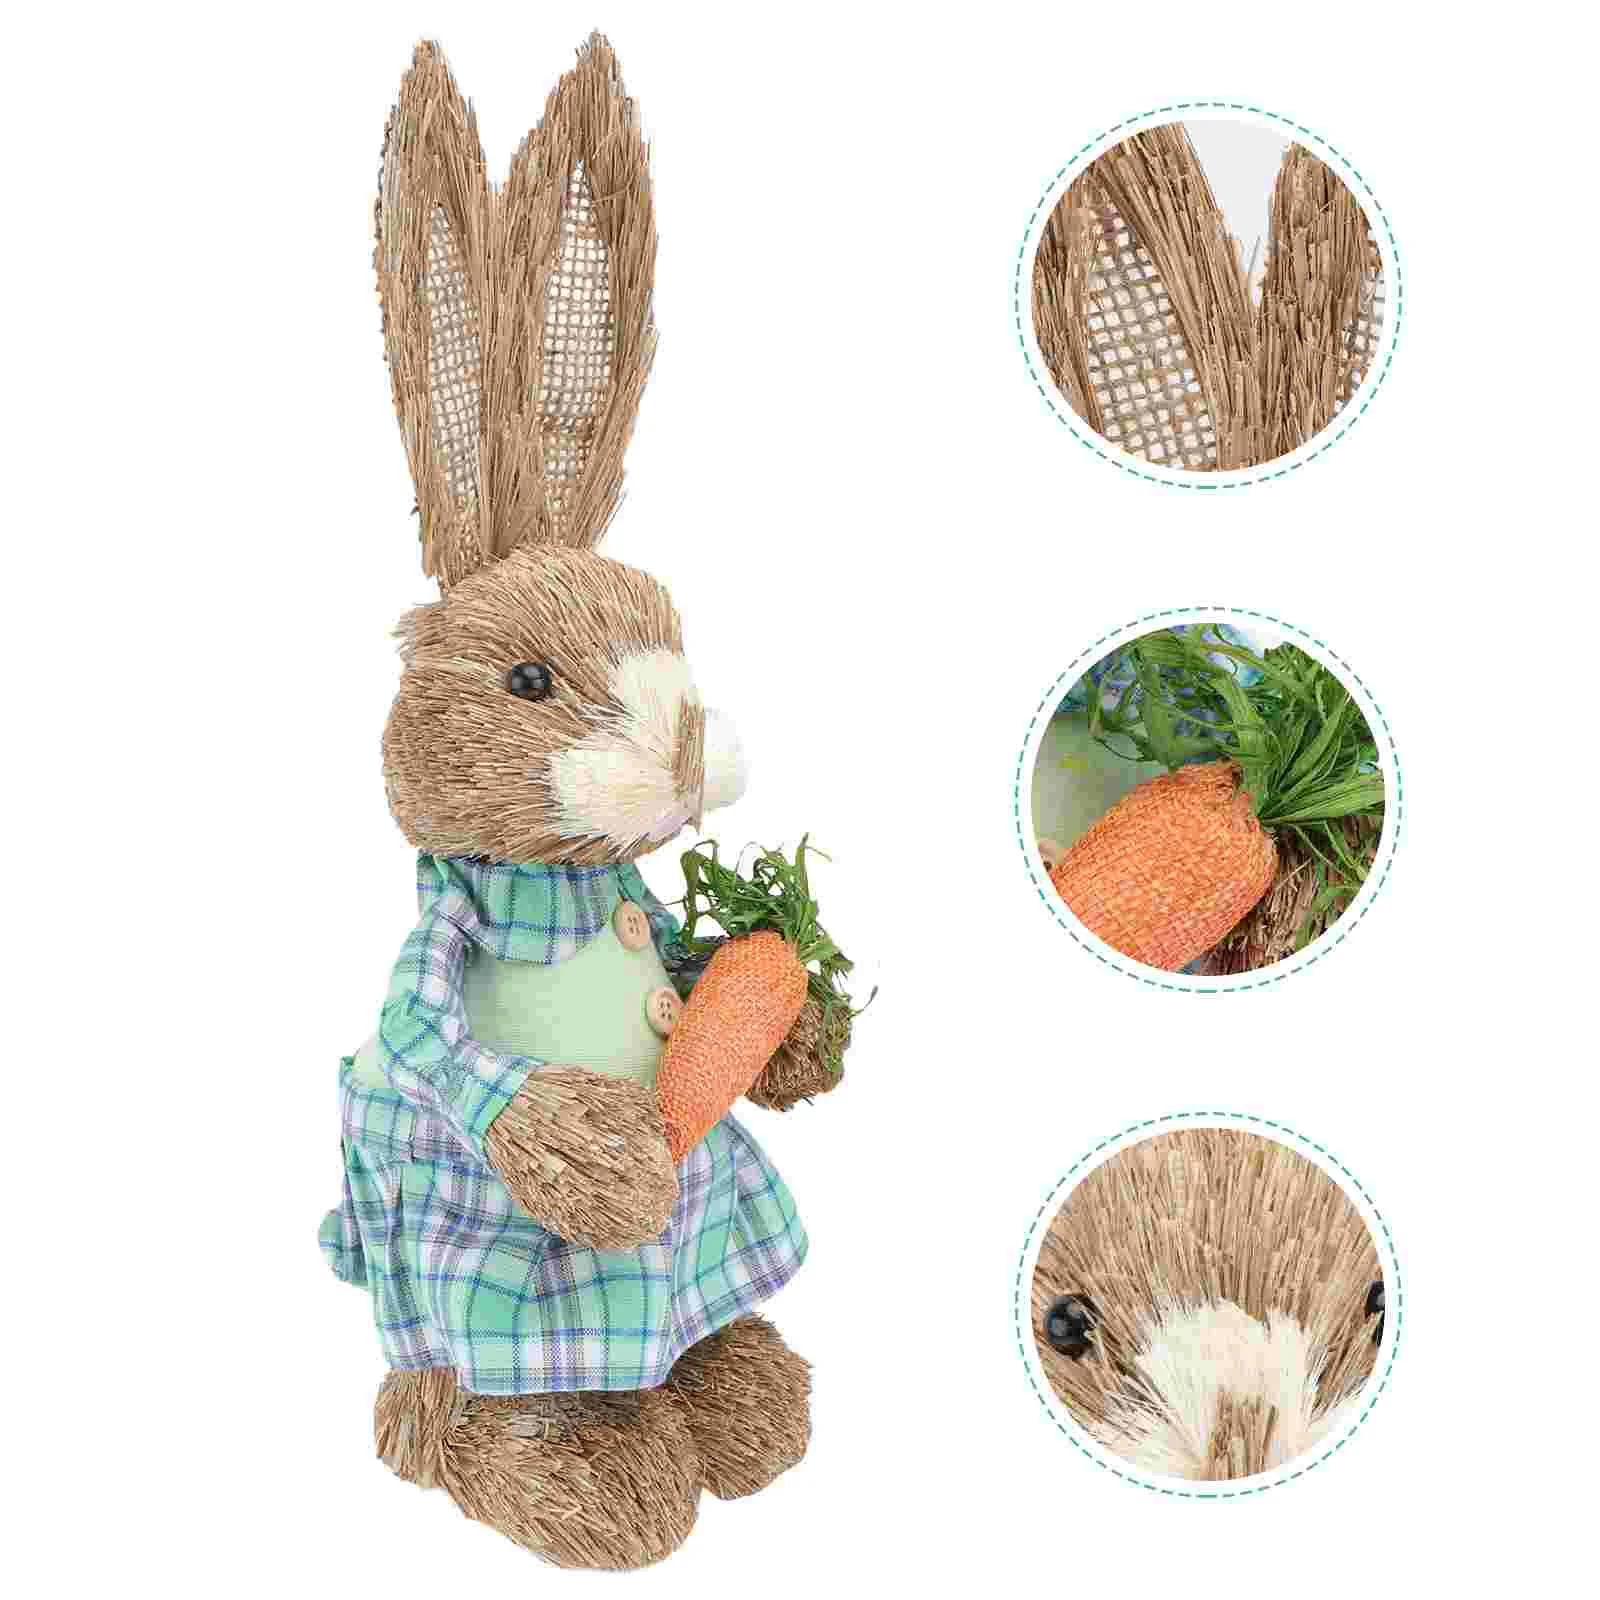 

Bunny Easter Table Rabbit Tabletop Figurine Sculptures Statues Decoration Basket Decor Animal Standing Straw Topper Figurines